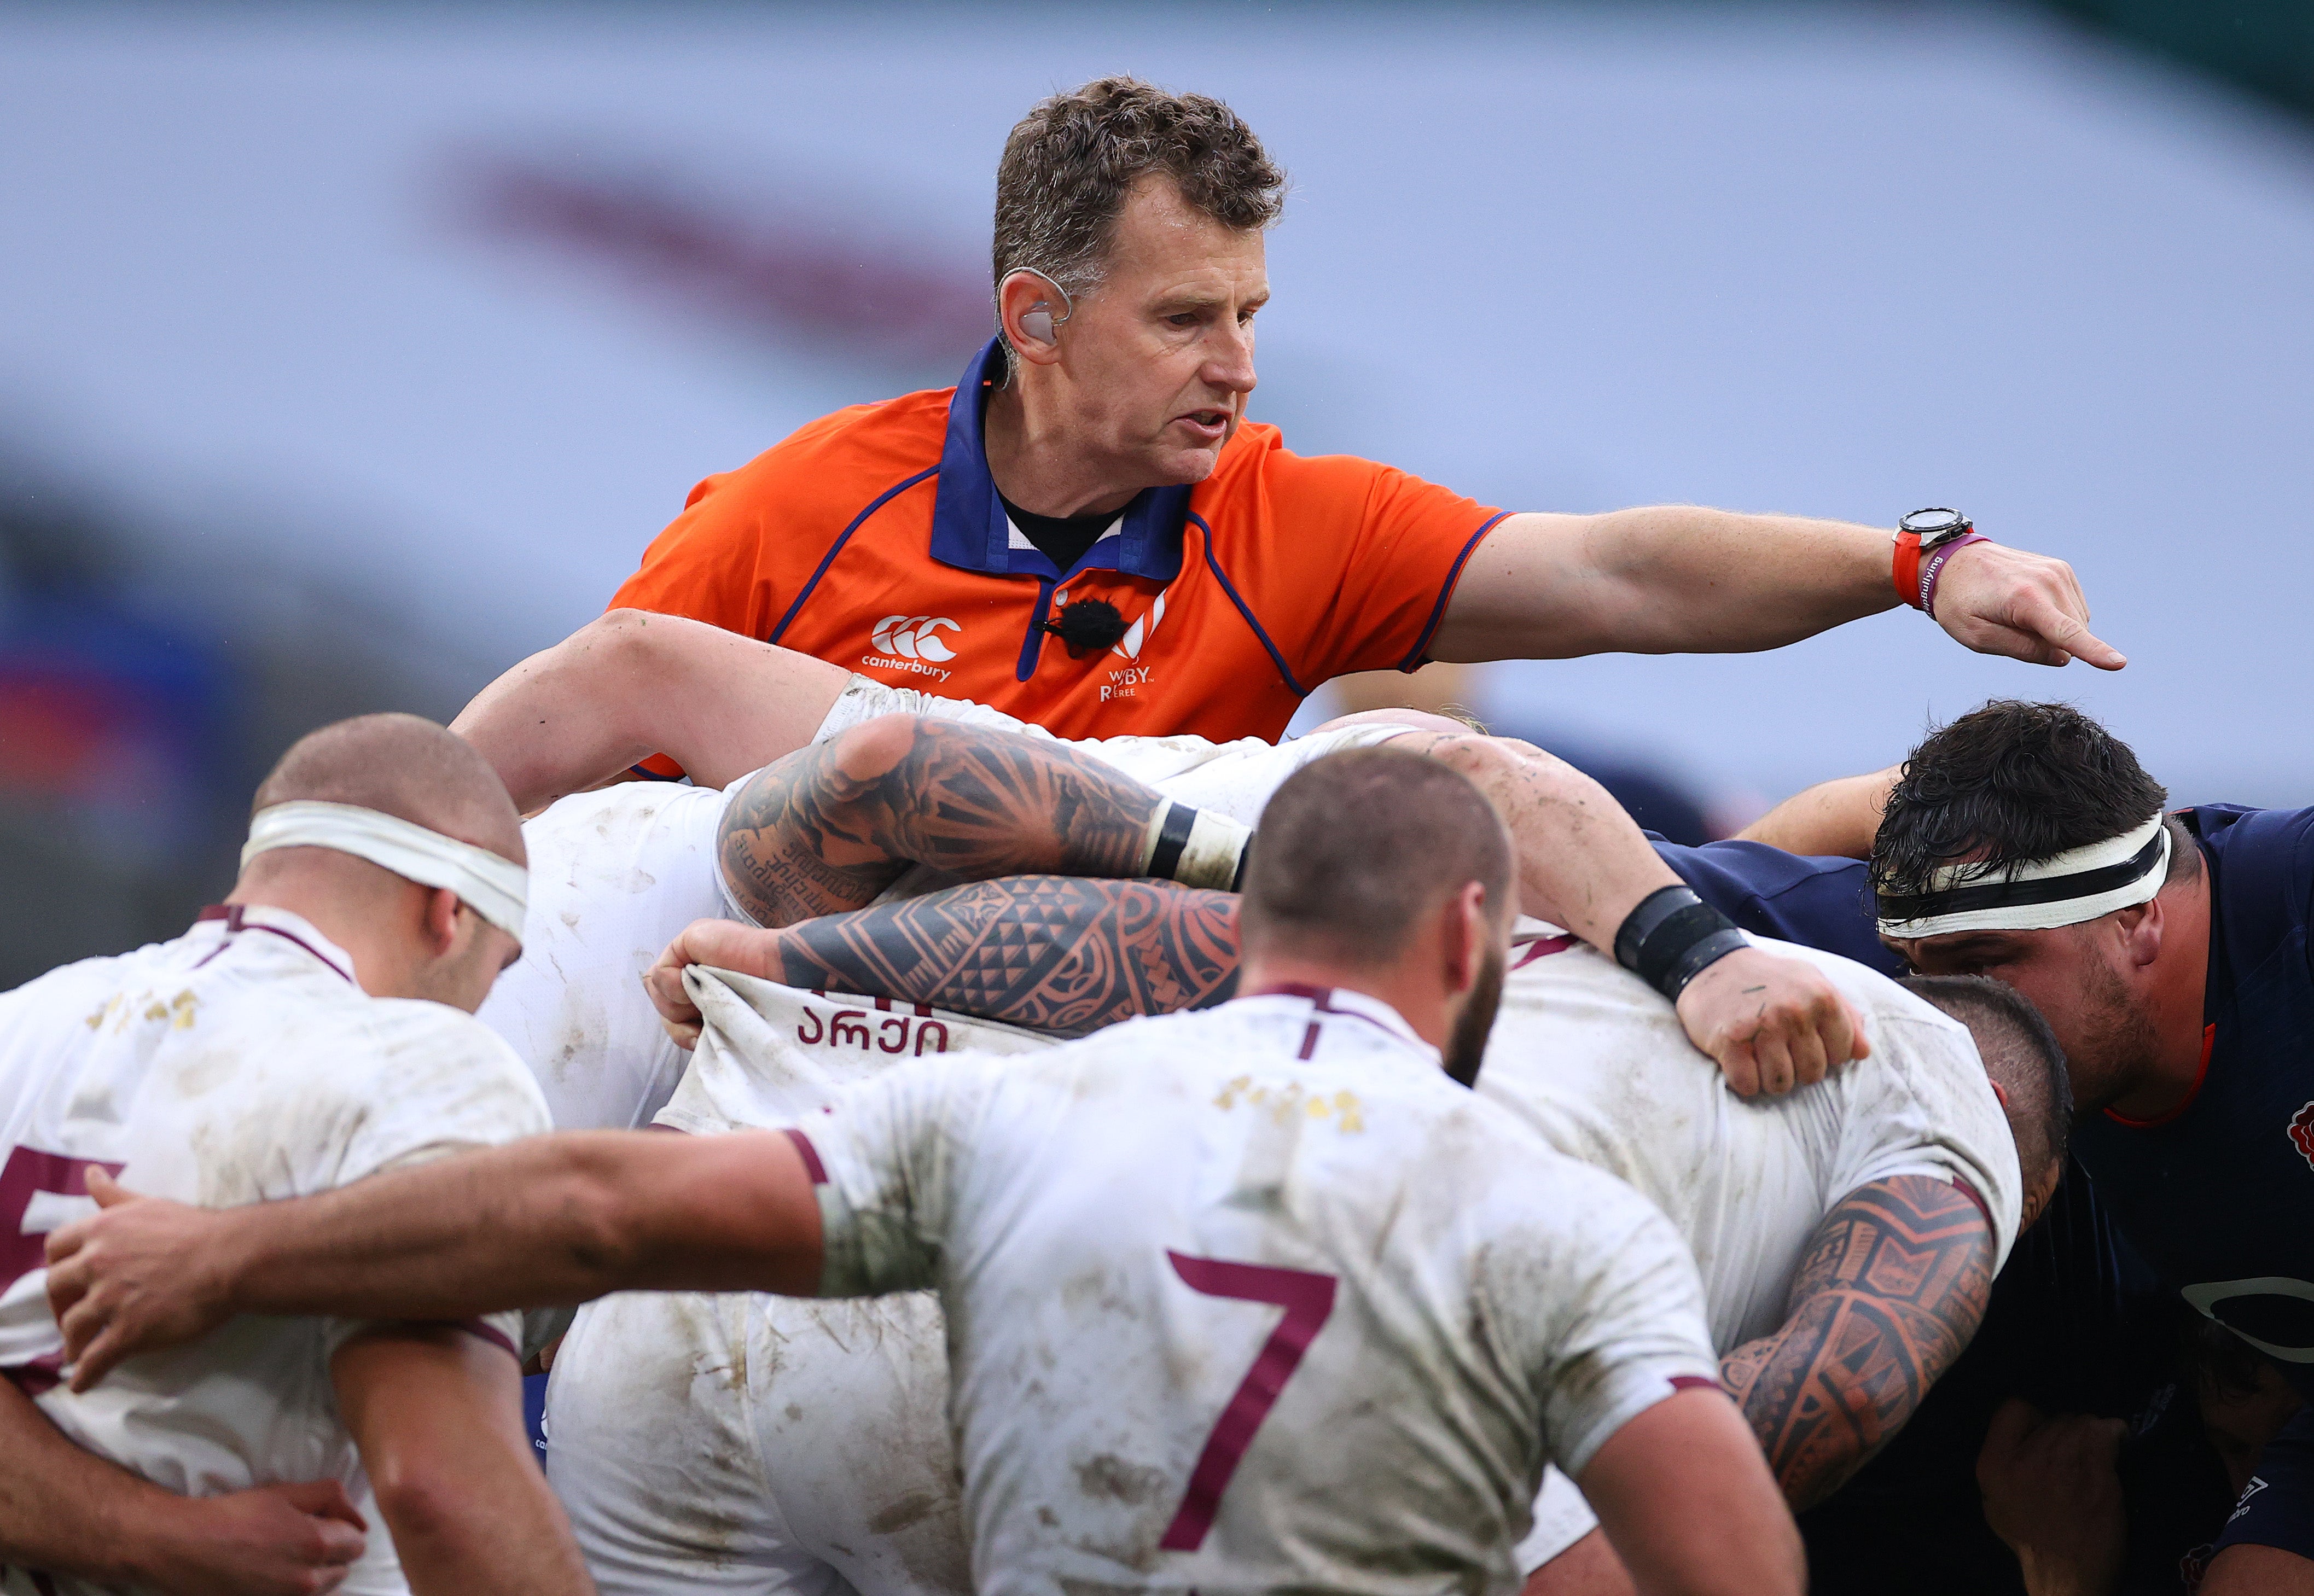 Nigel Owens will referee his 100th Test match this weekend